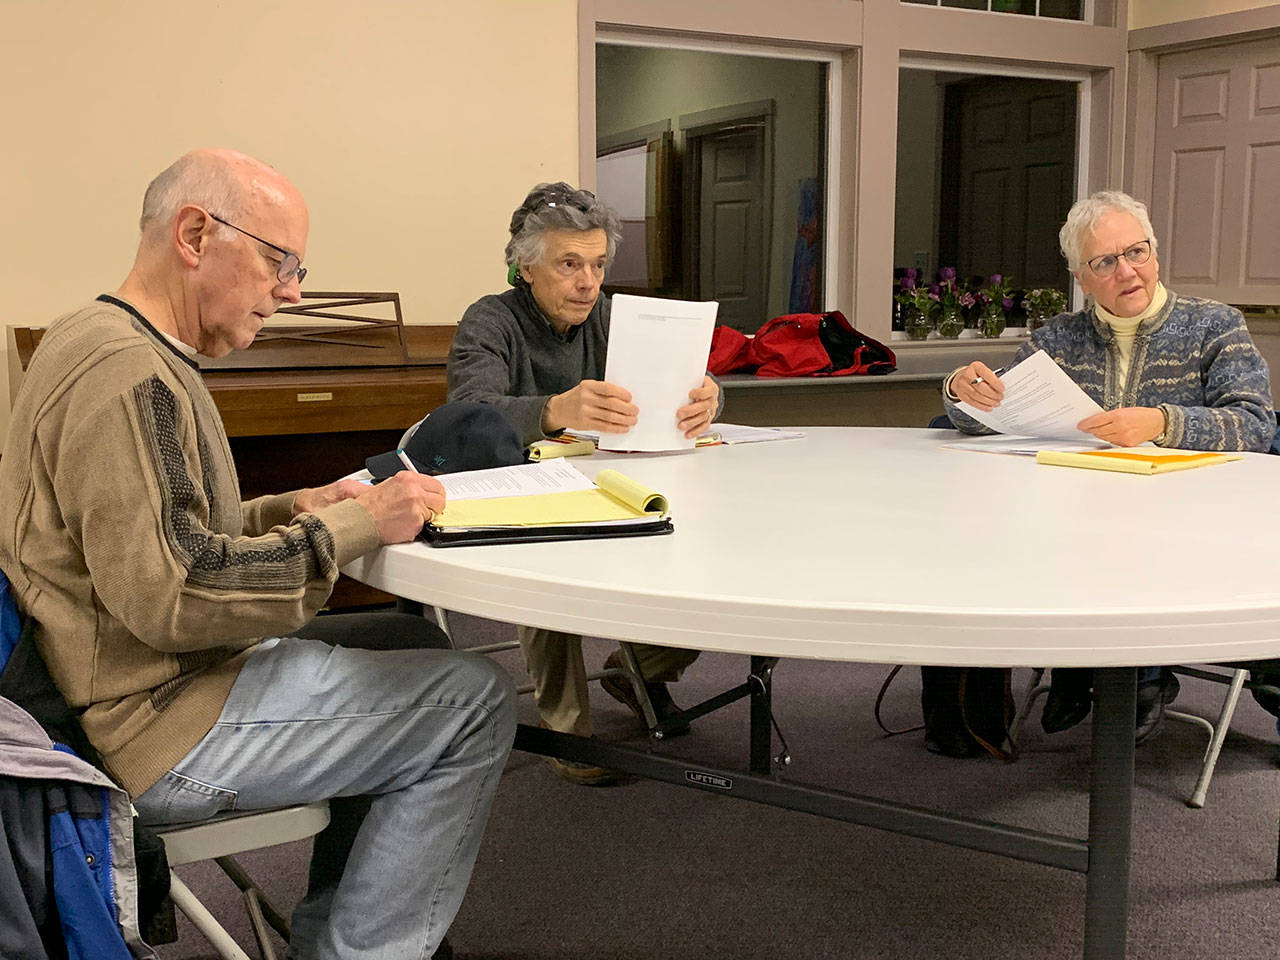 Vashon Health Care District commissioners (left to right) Eric Pryne, Don Wolczko and Wendy Noble talk to attendees of the meeting moments before it convenes on Feb. 5. (Kevin Opsahl/Staff Photo)